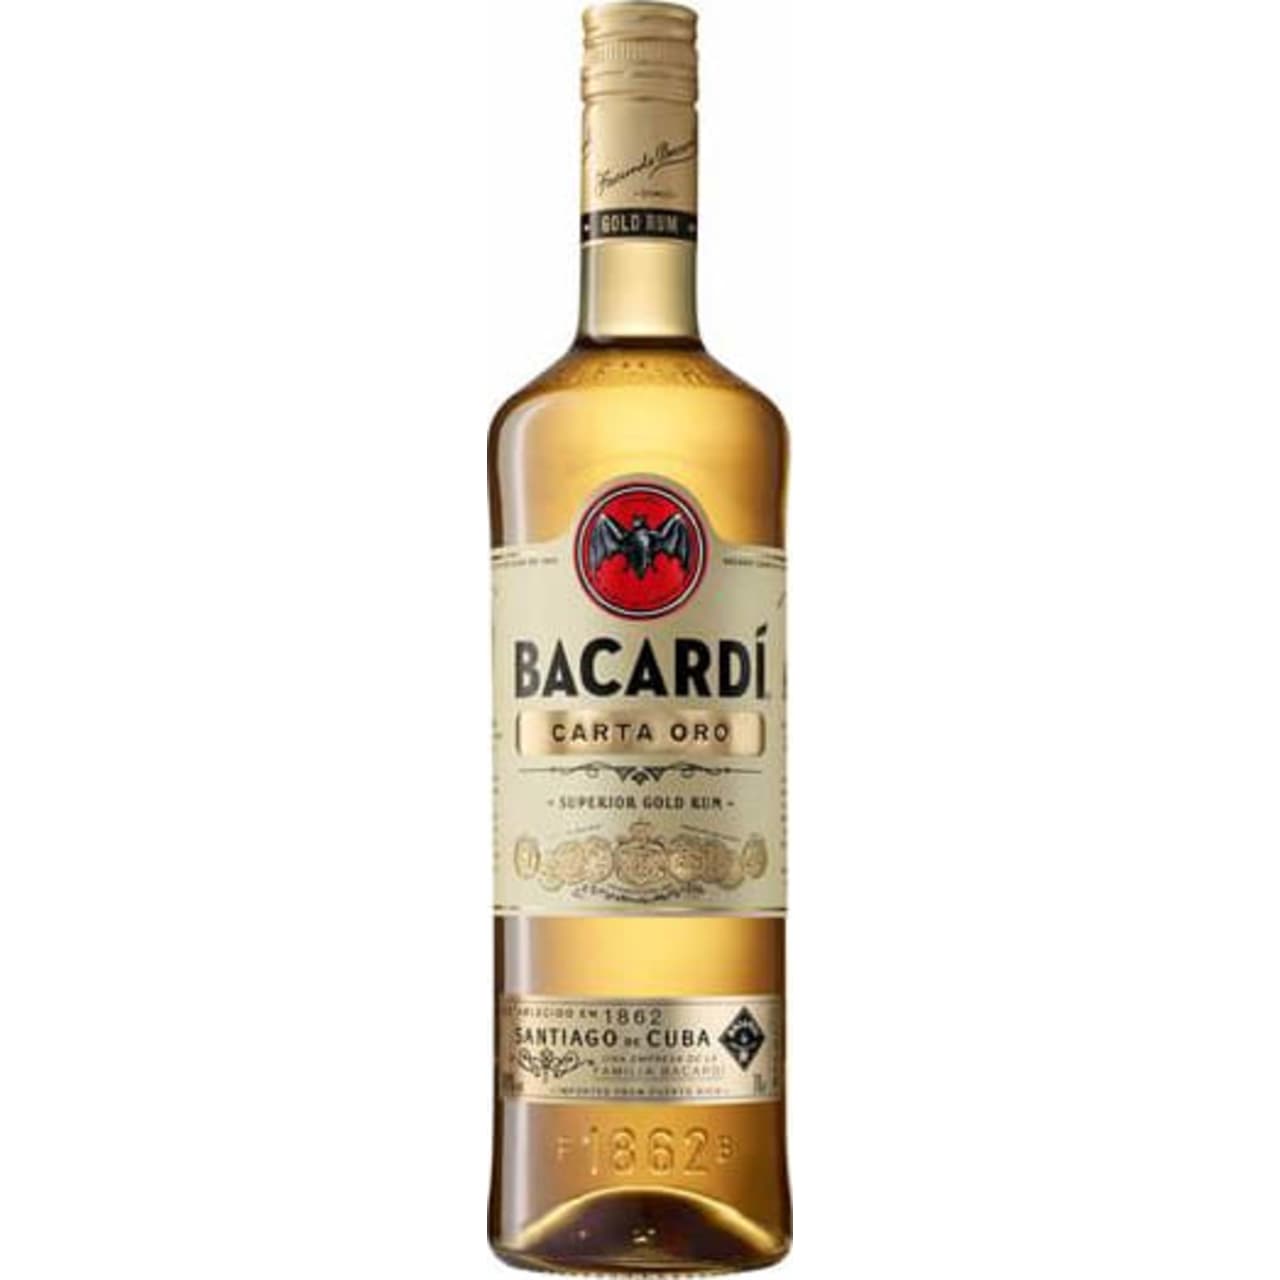 BACARDÍ Carta Oro rum brings together rich, soothing flavours like vanilla, buttery caramel, toasted almond and sweet banana notes balanced by the warm zest of orange peel and a light, oaky finish.